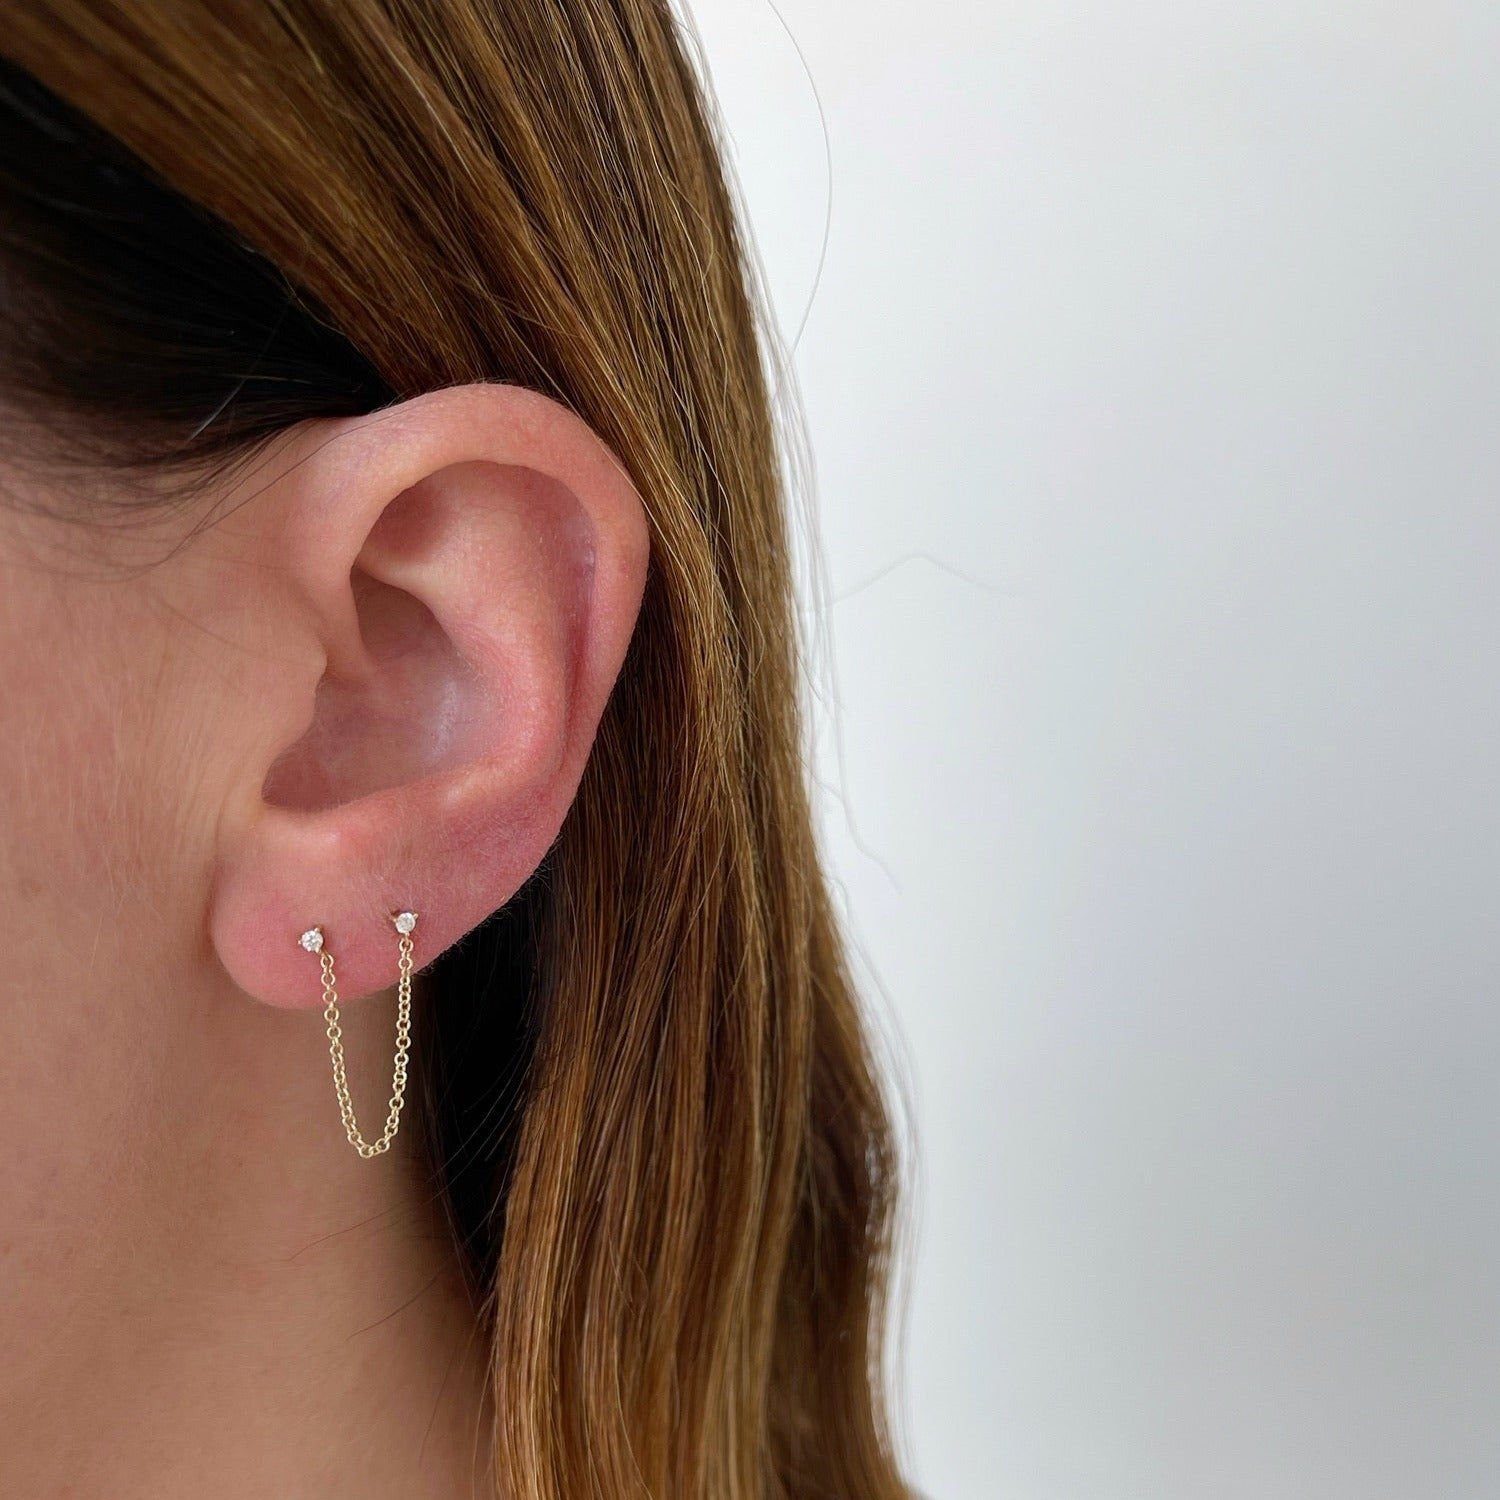 Double Diamond Chain Stud Earring in 14k yellow gold styled on ear of model with brown hair